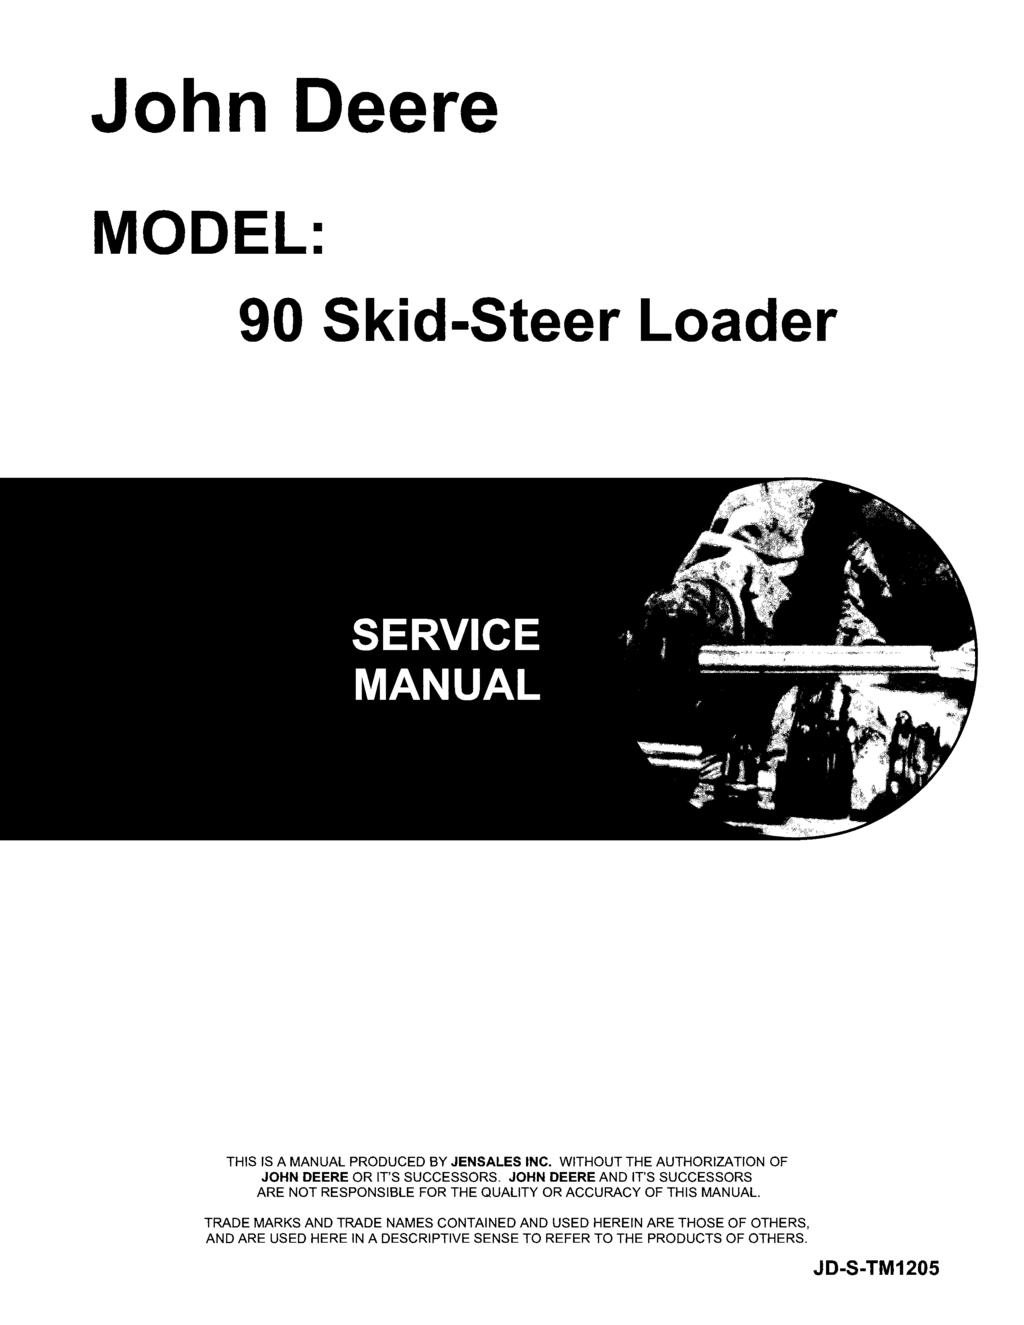 John Deere MODEL: 90 Skid-Steer Loader THIS IS A MANUAL PRODUCED BY JENSALES INC. WITHOUT THE AUTHORIZATION OF JOHN DEERE OR IT'S SUCCESSORS.